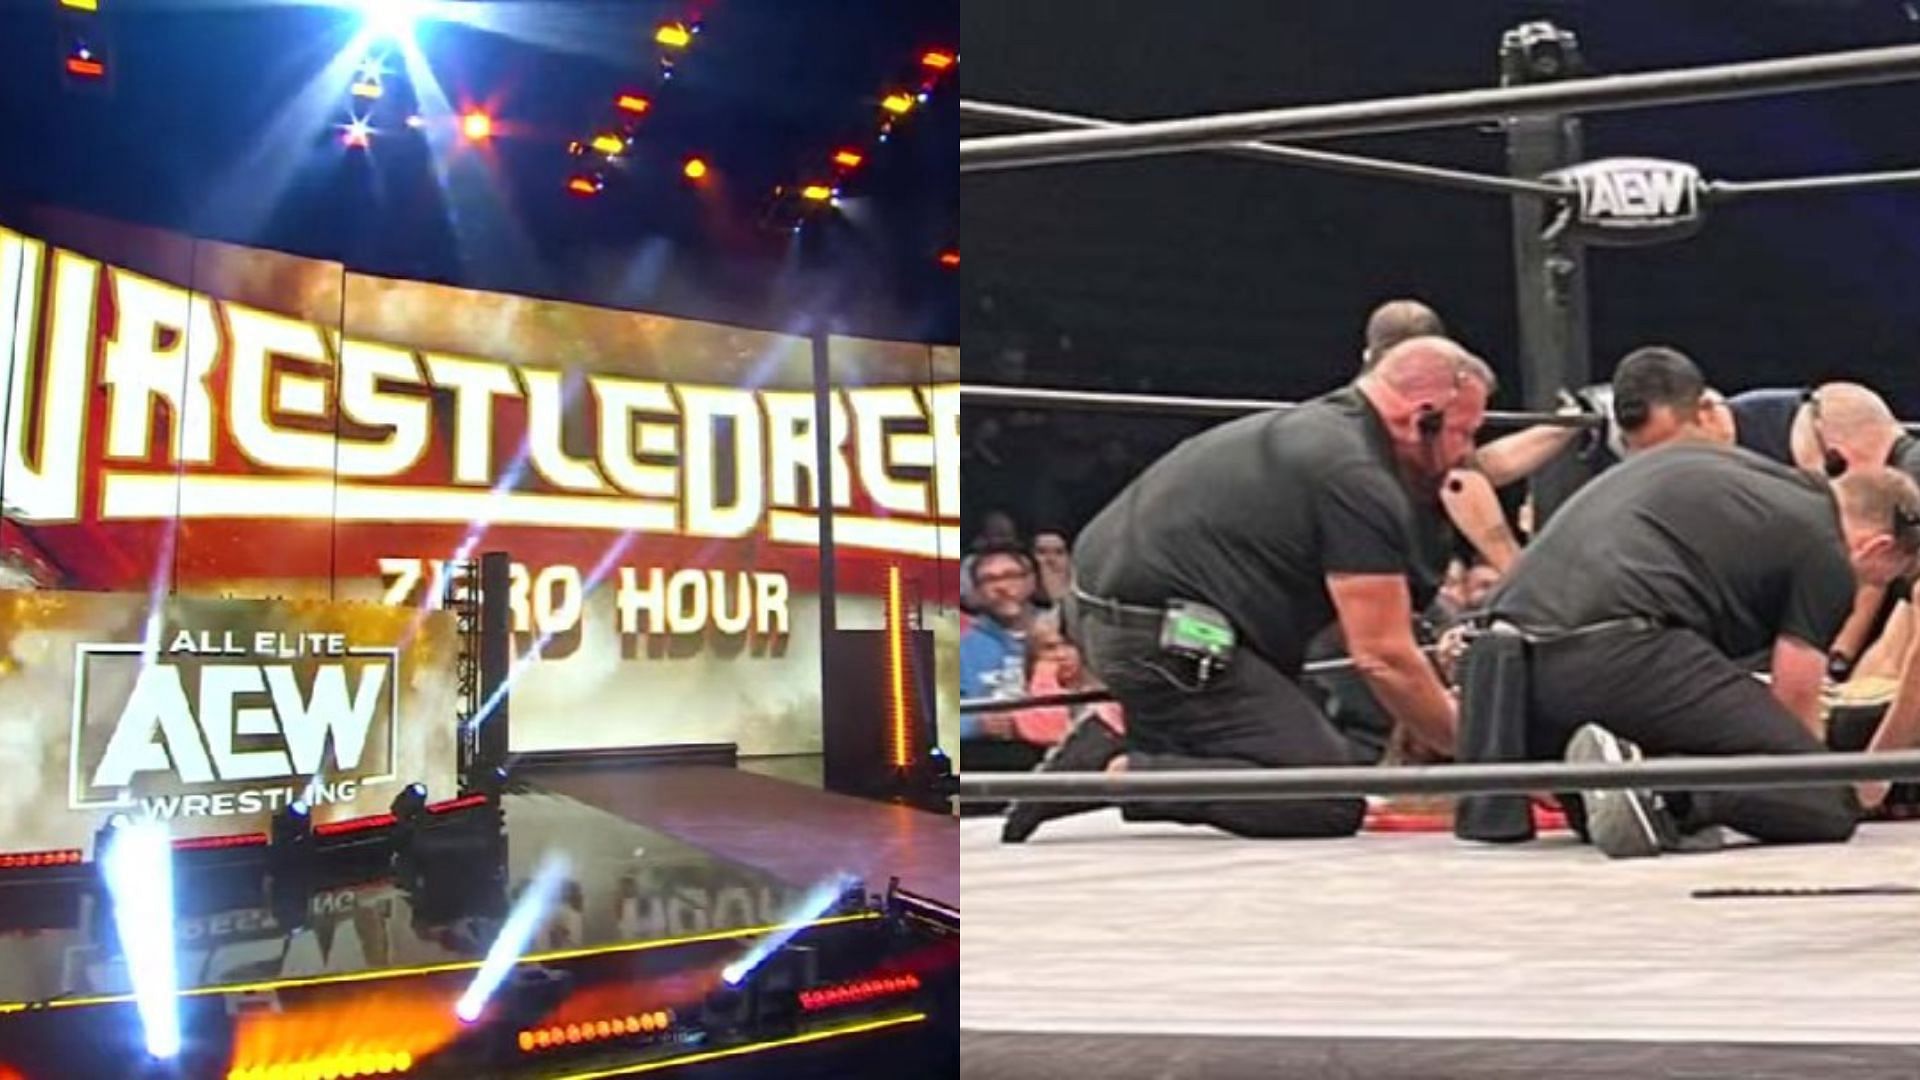 An AEW star was seemingly injured at WrestleDream